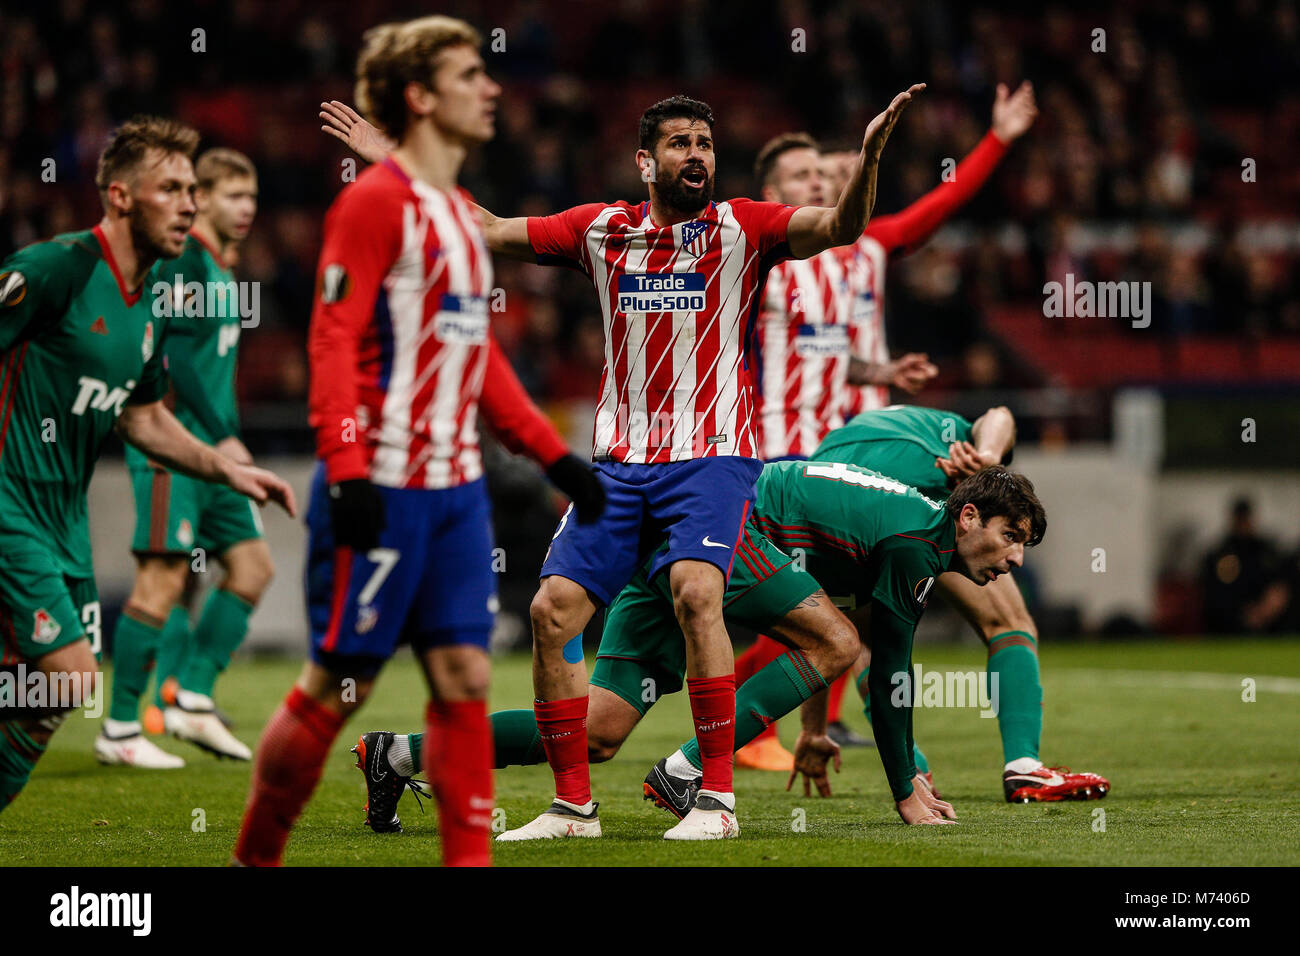 Madrid, Spain. 8th Mar, 2018. Diego Costa (Atletico de Madrid) frustrated as he missed a good goal scoring chance UEFA Europa League match between Atletico de Madrid vs Lokomotiv Moscu at the Wanda Metropolitano stadium in Madrid, Spain, March 8, 2018. Credit: Gtres Información más Comuniación on line, S.L./Alamy Live News Stock Photo